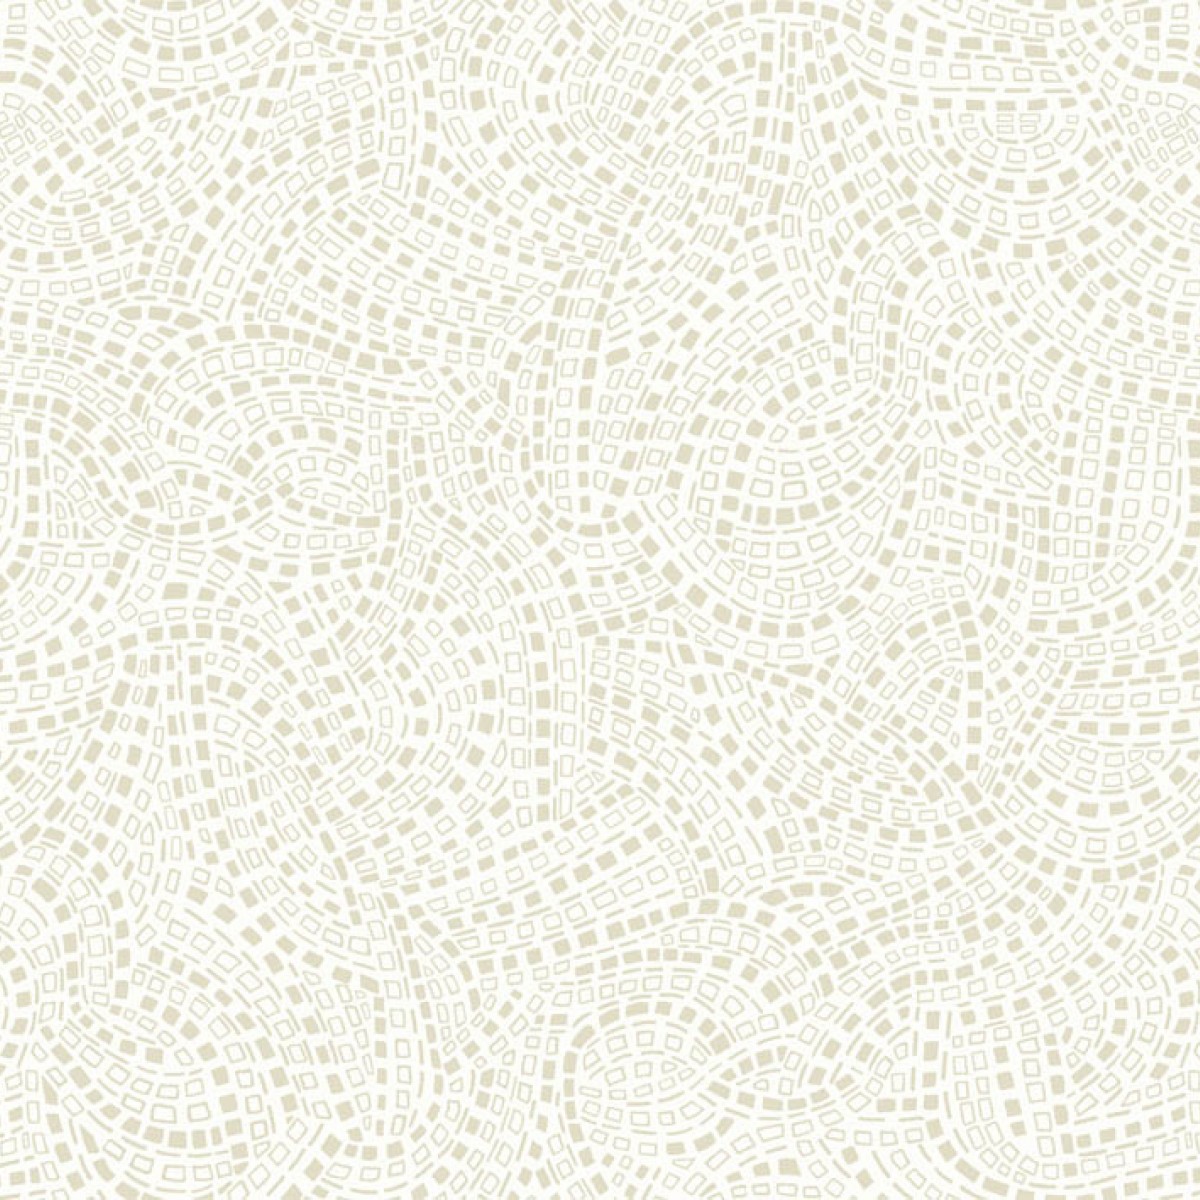 Tapet Mosaic, Shimmer Gold and Cream Luxury, 1838 Wallcoverings, 5.3mp / rola, Tapet living 